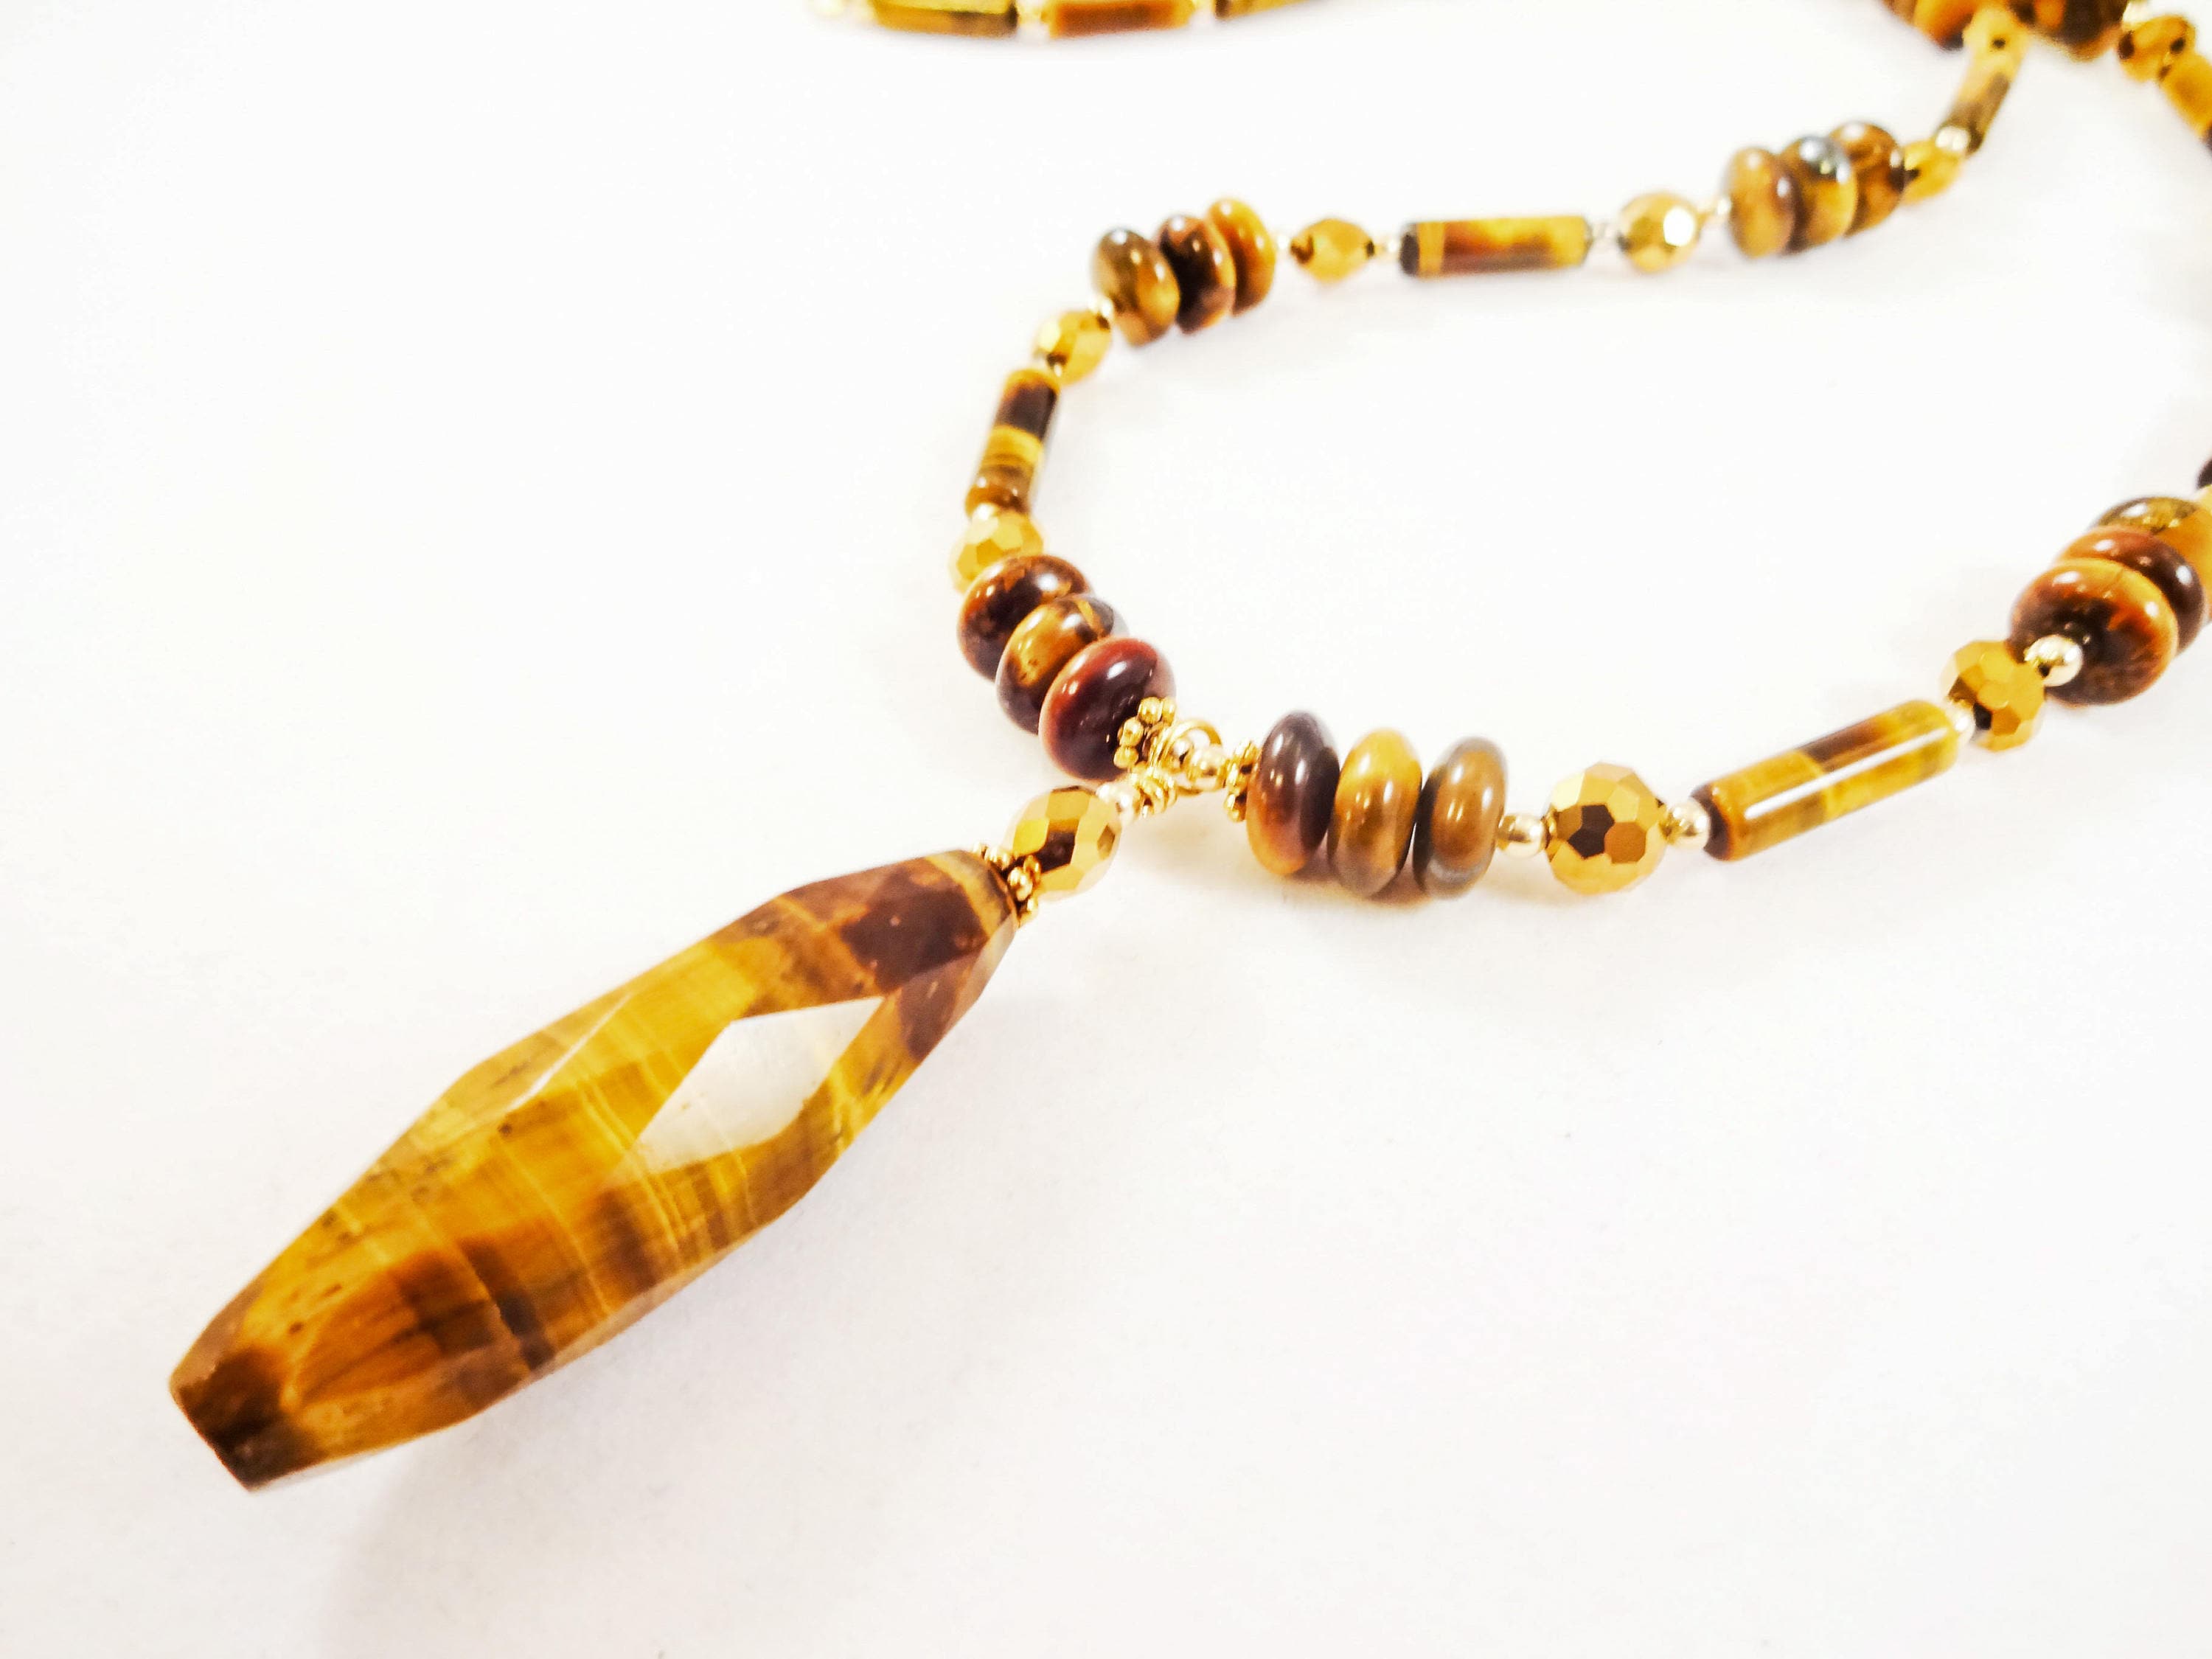 Tiger S Eye Necklace Tigers Eye Gemstone Necklace Brown Stone Pendant